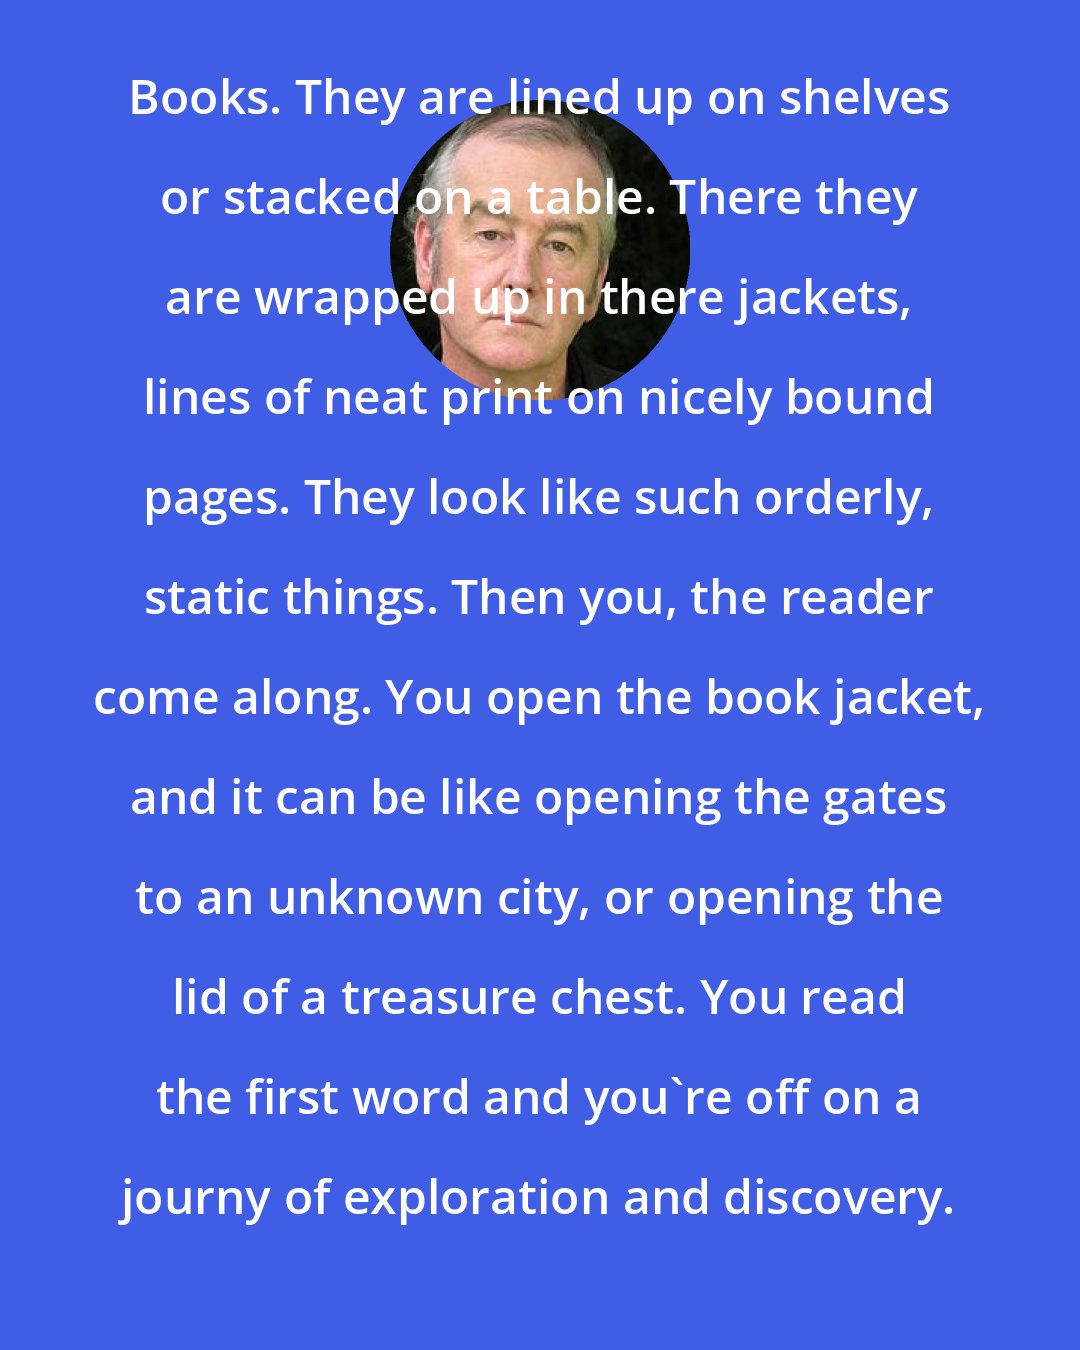 David Almond: Books. They are lined up on shelves or stacked on a table. There they are wrapped up in there jackets, lines of neat print on nicely bound pages. They look like such orderly, static things. Then you, the reader come along. You open the book jacket, and it can be like opening the gates to an unknown city, or opening the lid of a treasure chest. You read the first word and you're off on a journy of exploration and discovery.